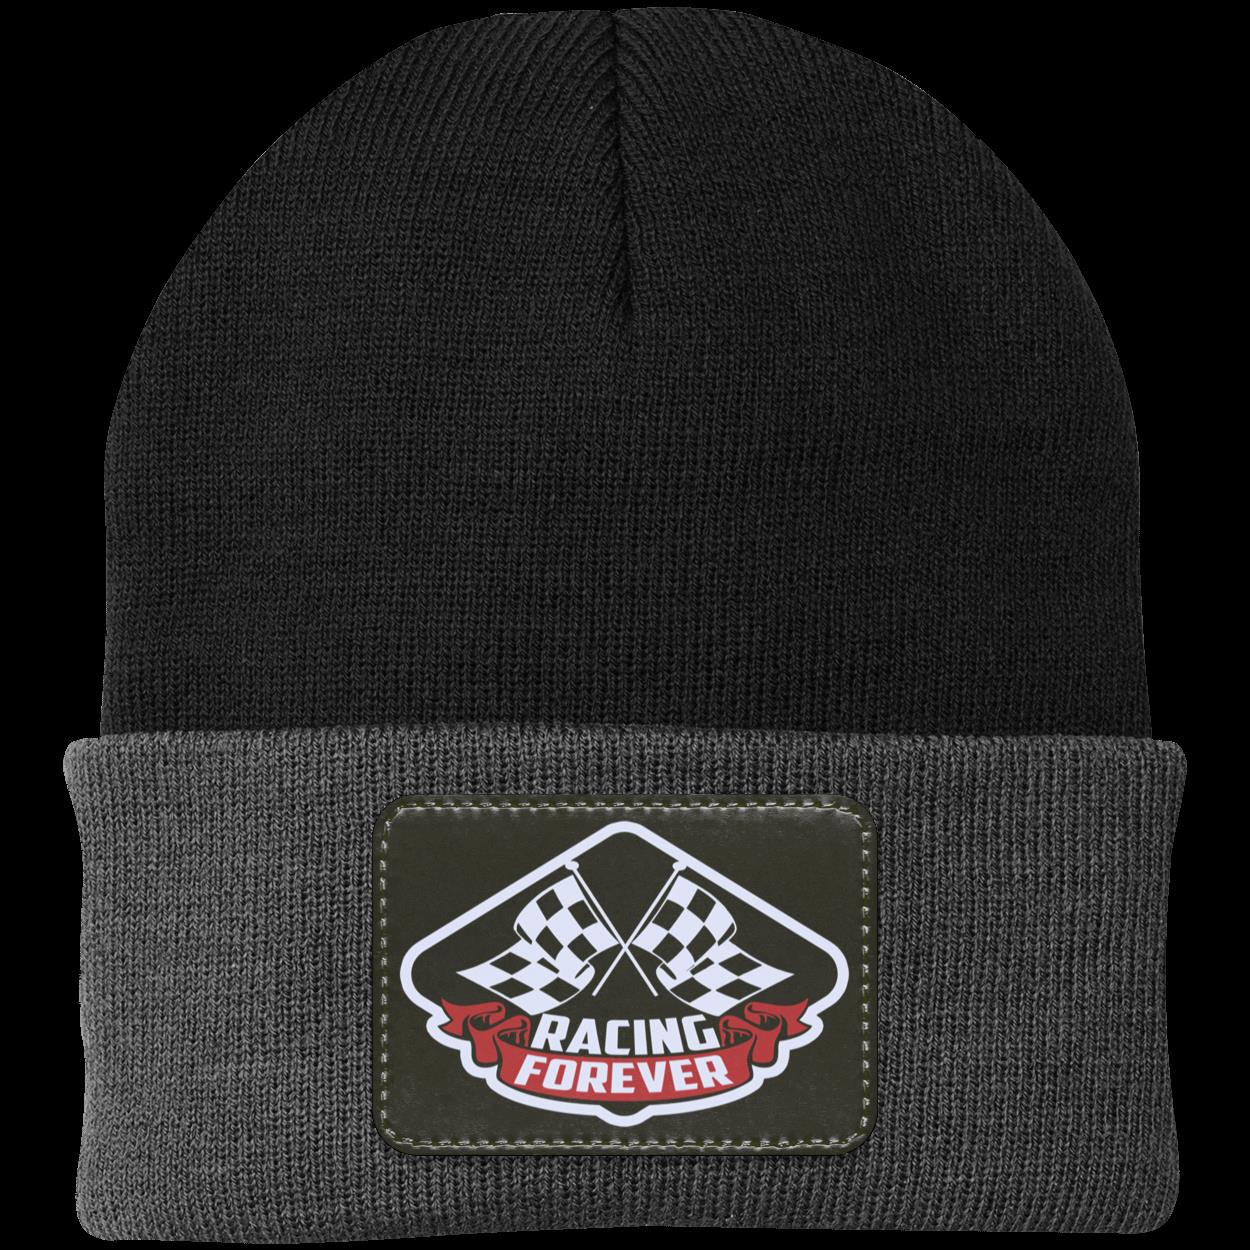 Racing Forever Patched Knit Cap V4